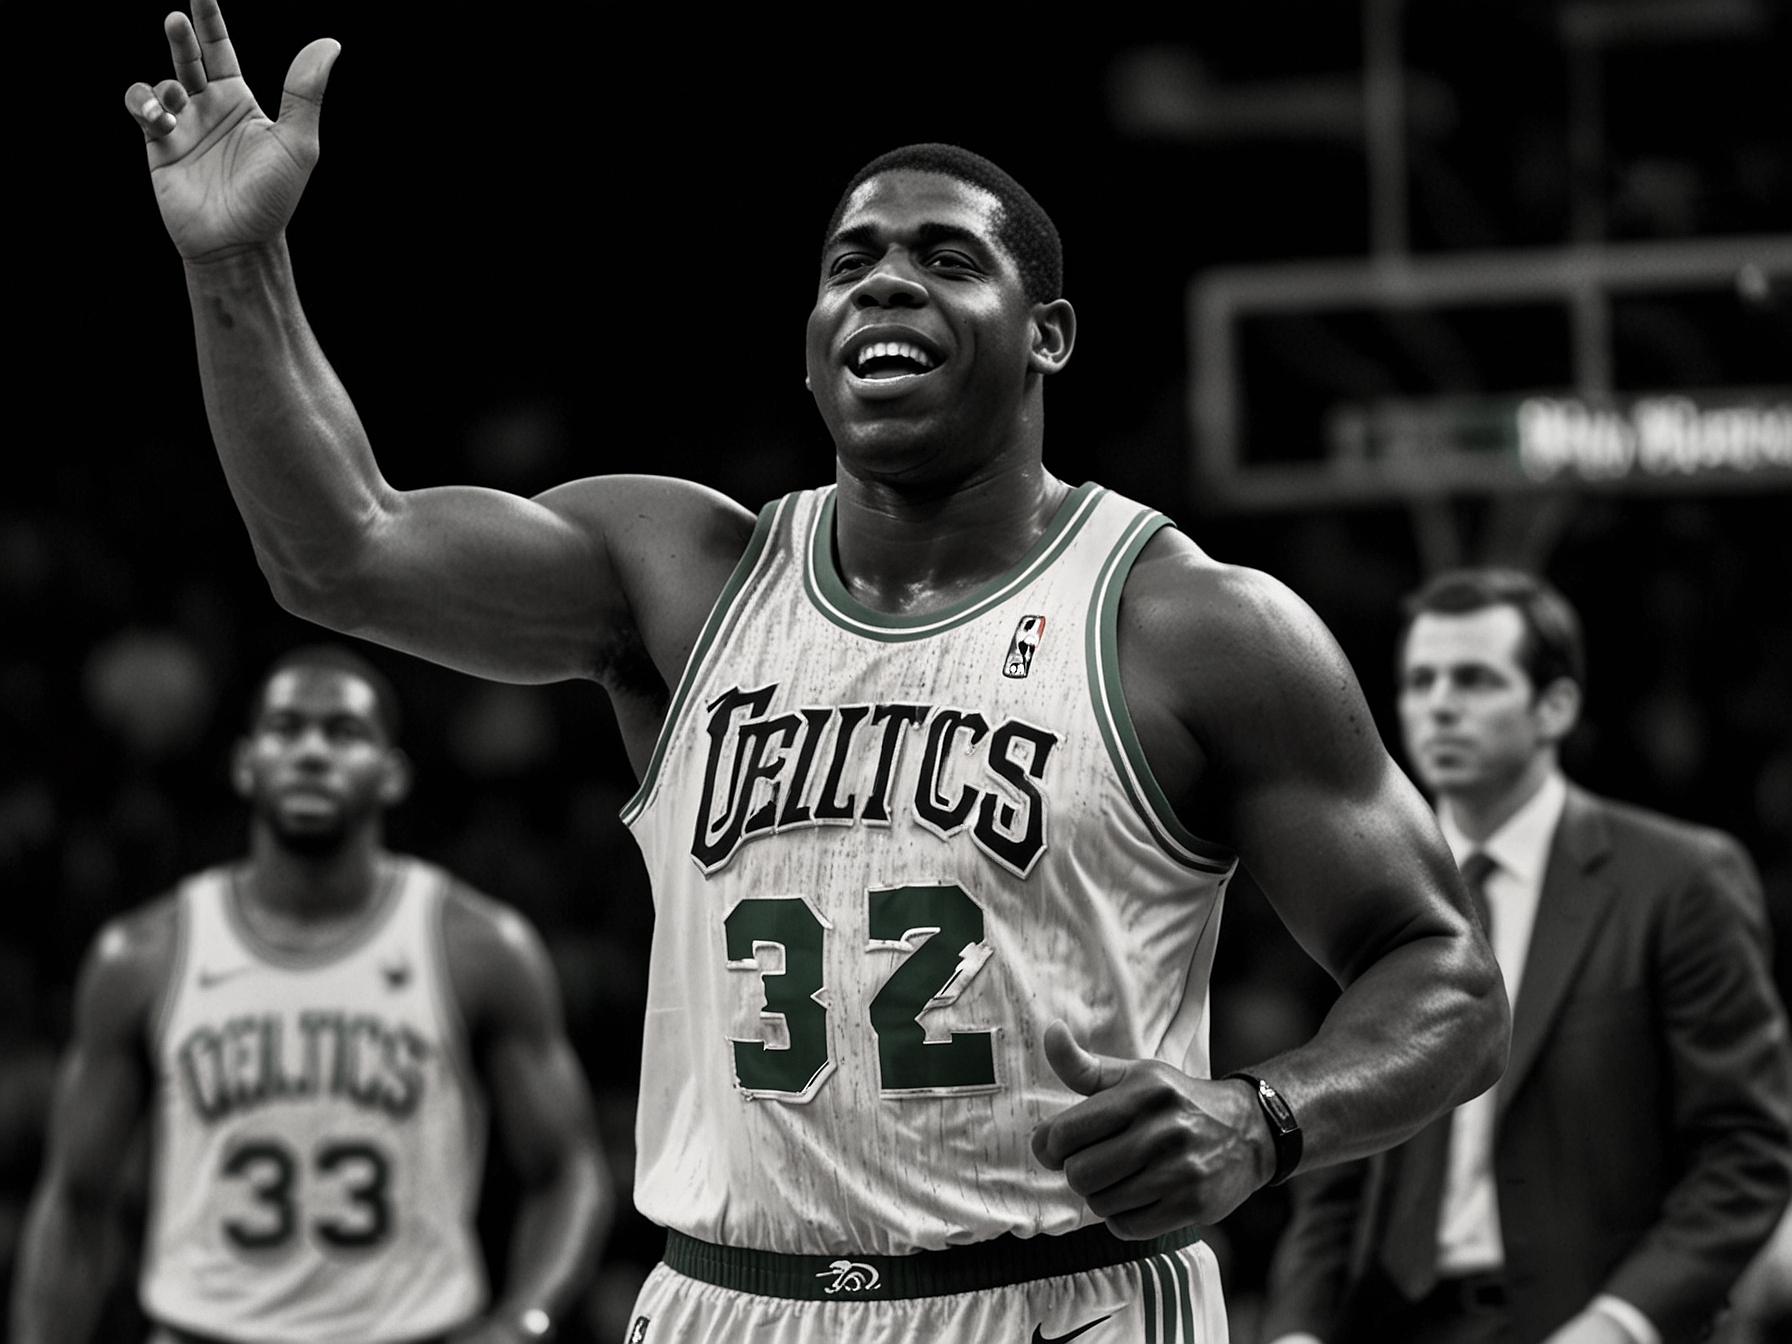 Magic Johnson posts on Twitter, congratulating the Boston Celtics for winning their 18th NBA championship, a sportsmanlike gesture highlighting the historic rivalry.